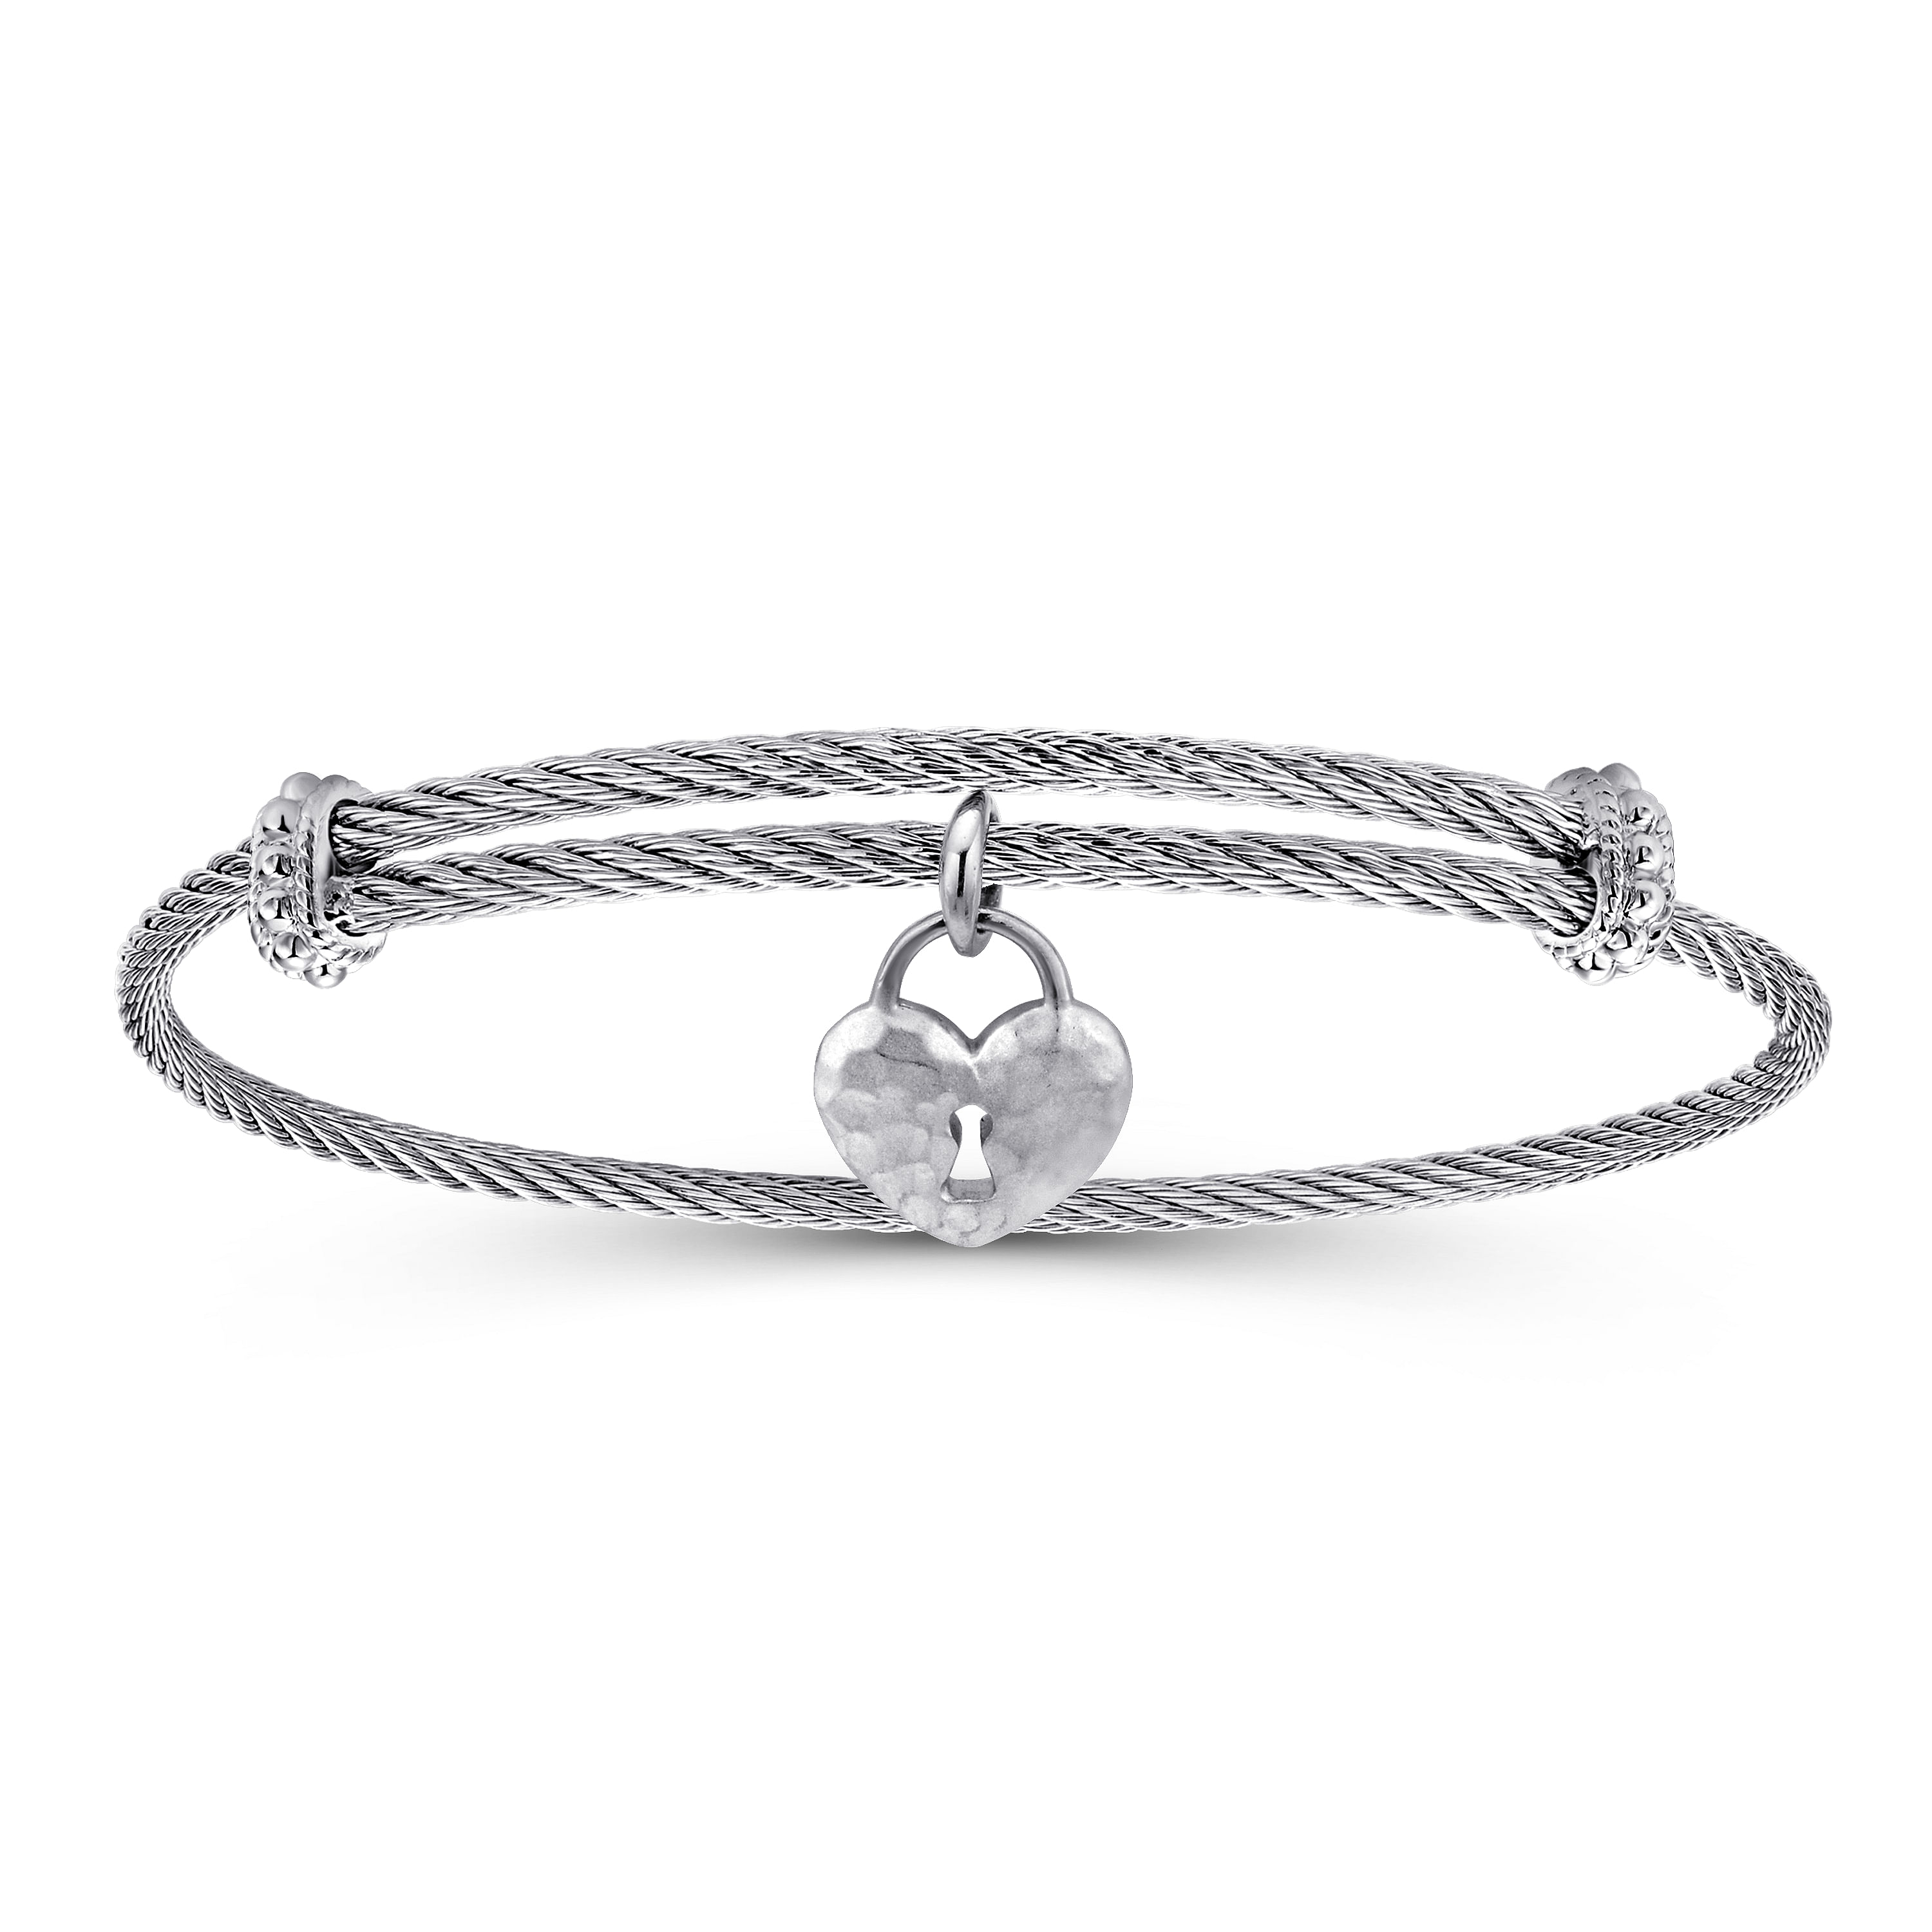 Adjustable-Twisted-Cable-Stainless-Steel-Bangle-with-Sterling-Silver-Heart-Lock-Charm1